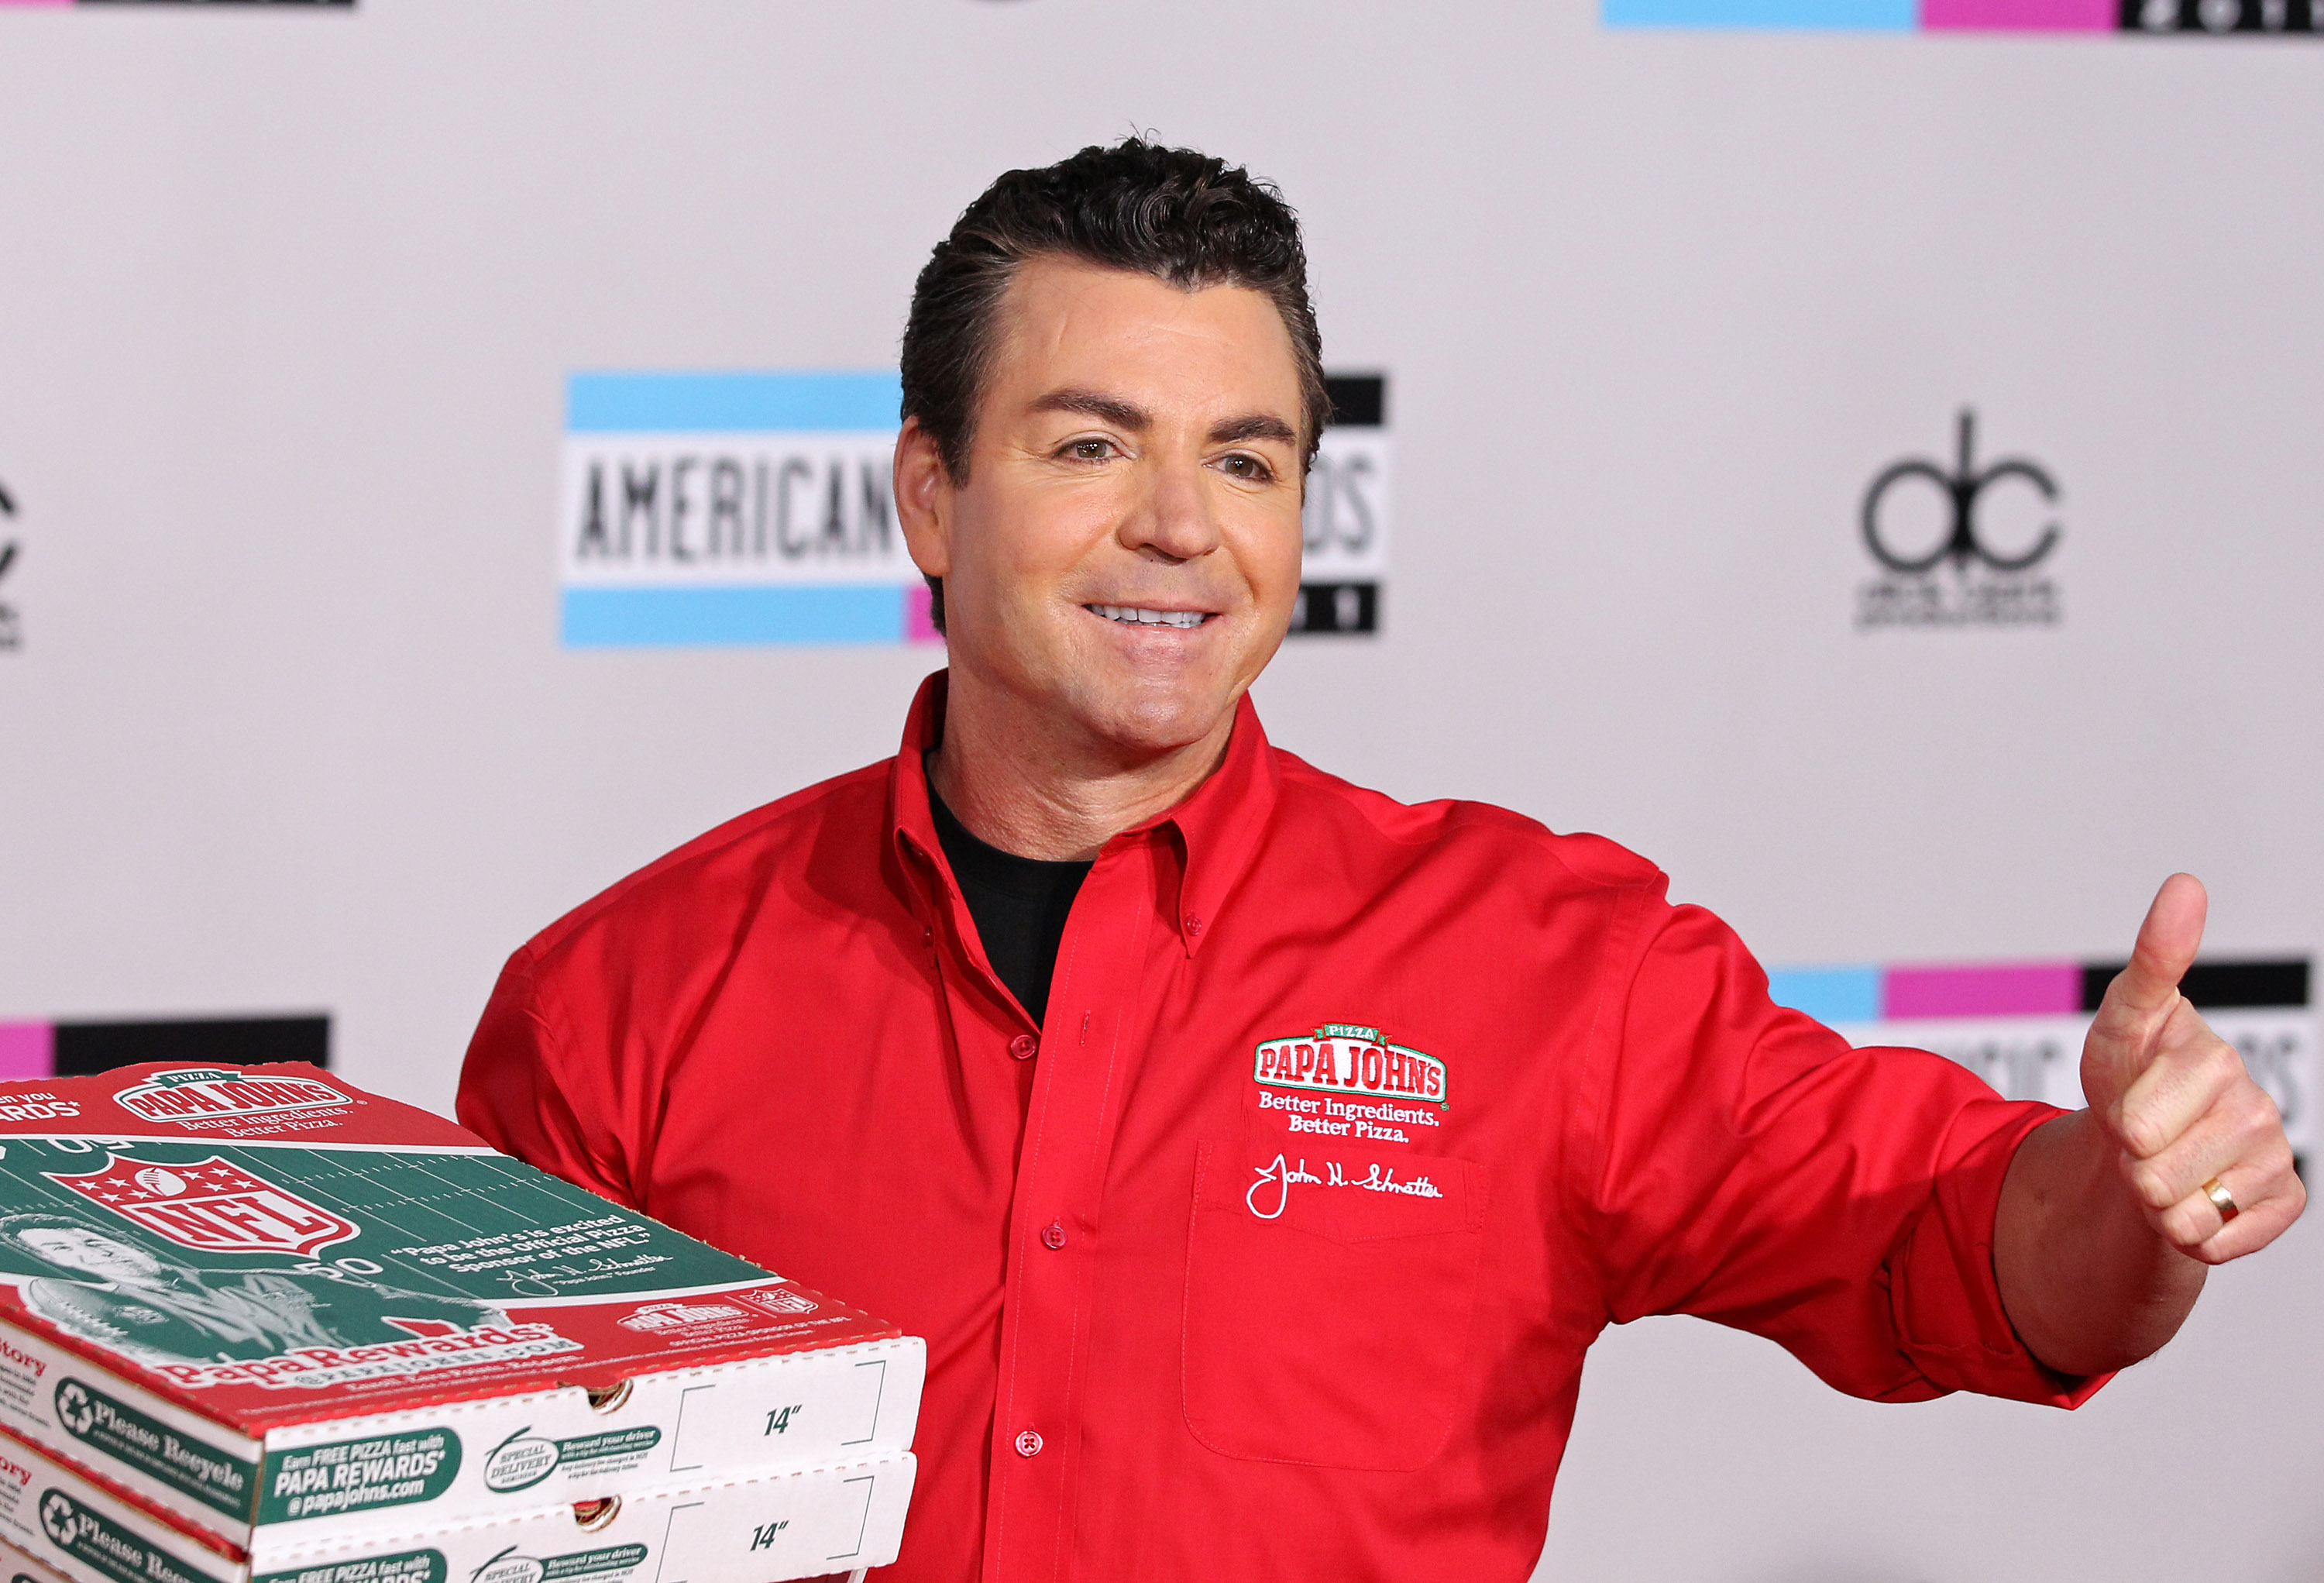 Papa John's Founder John Schnatter Is Stepping Down as CEO. Here’s How Much He Made